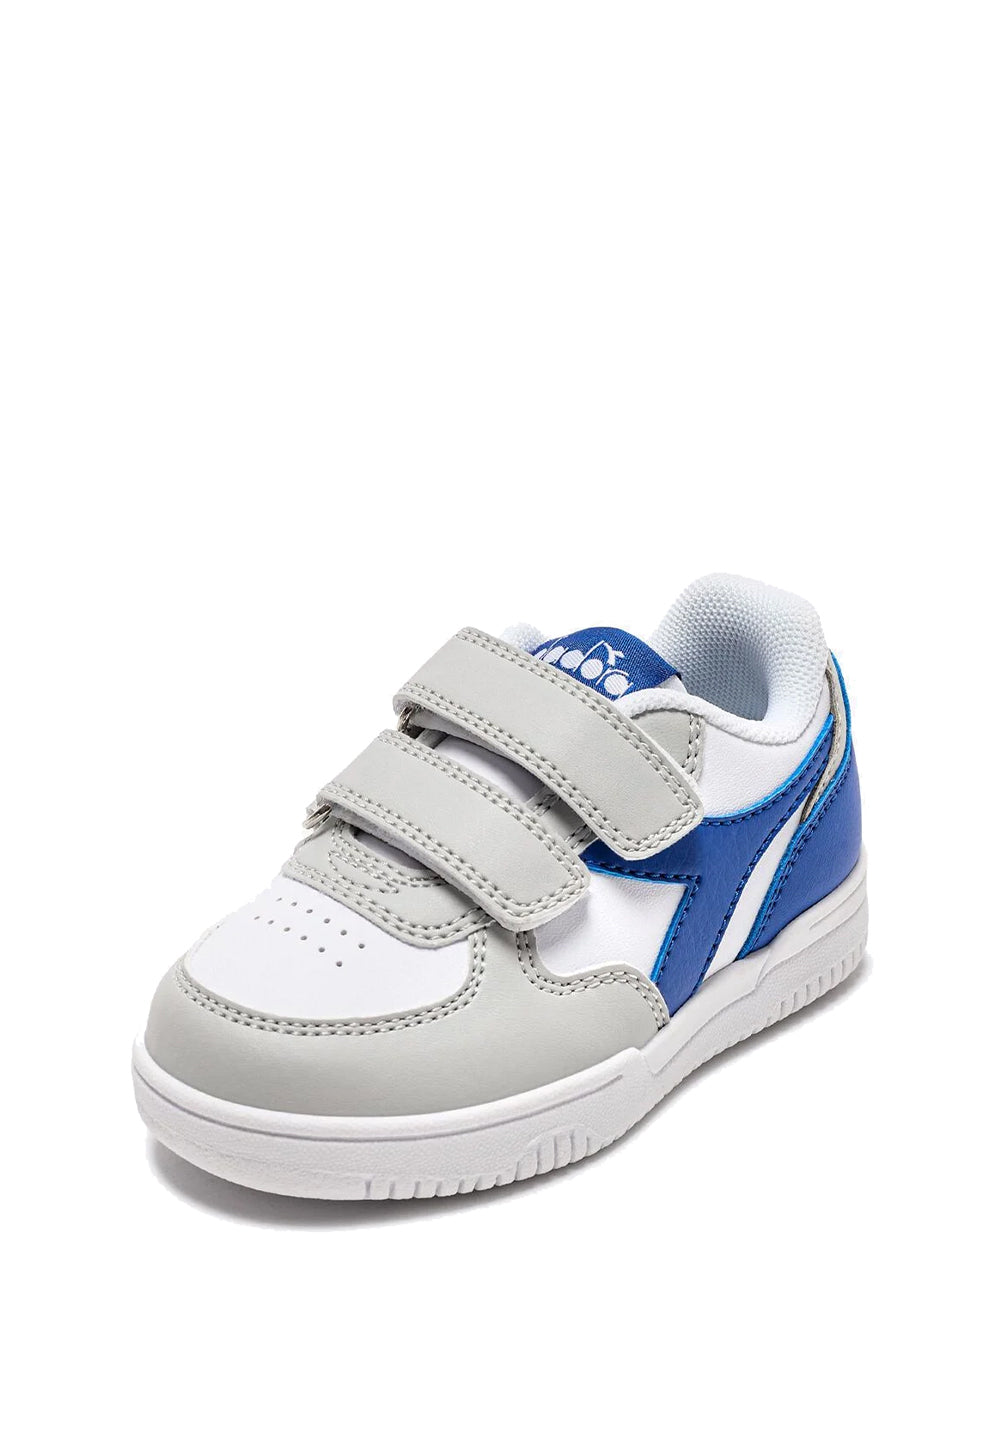 White-blue shoes for newborn